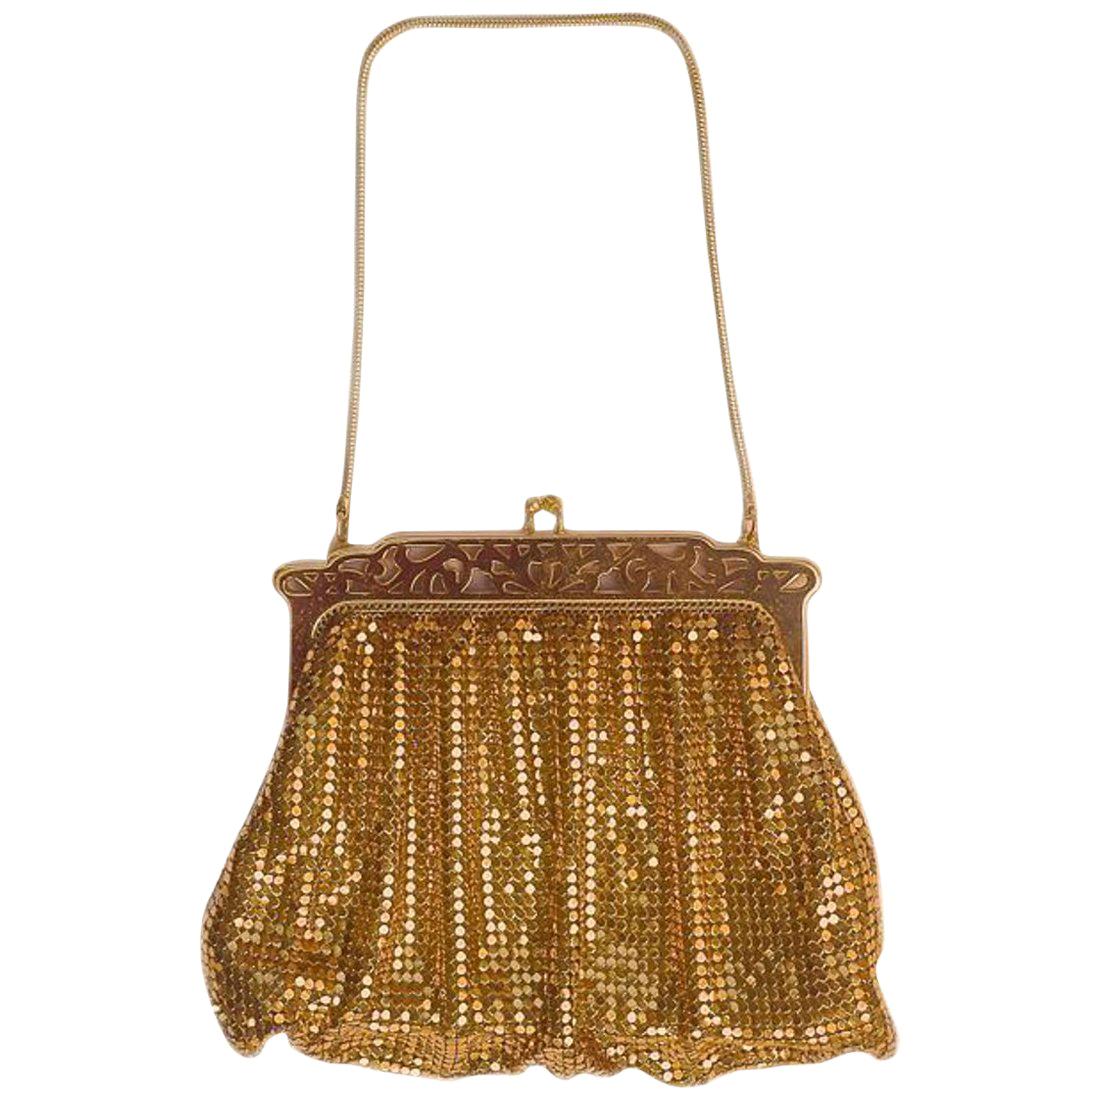 Whiting & Davis Gold Mesh Bag with Cut-Out Frame